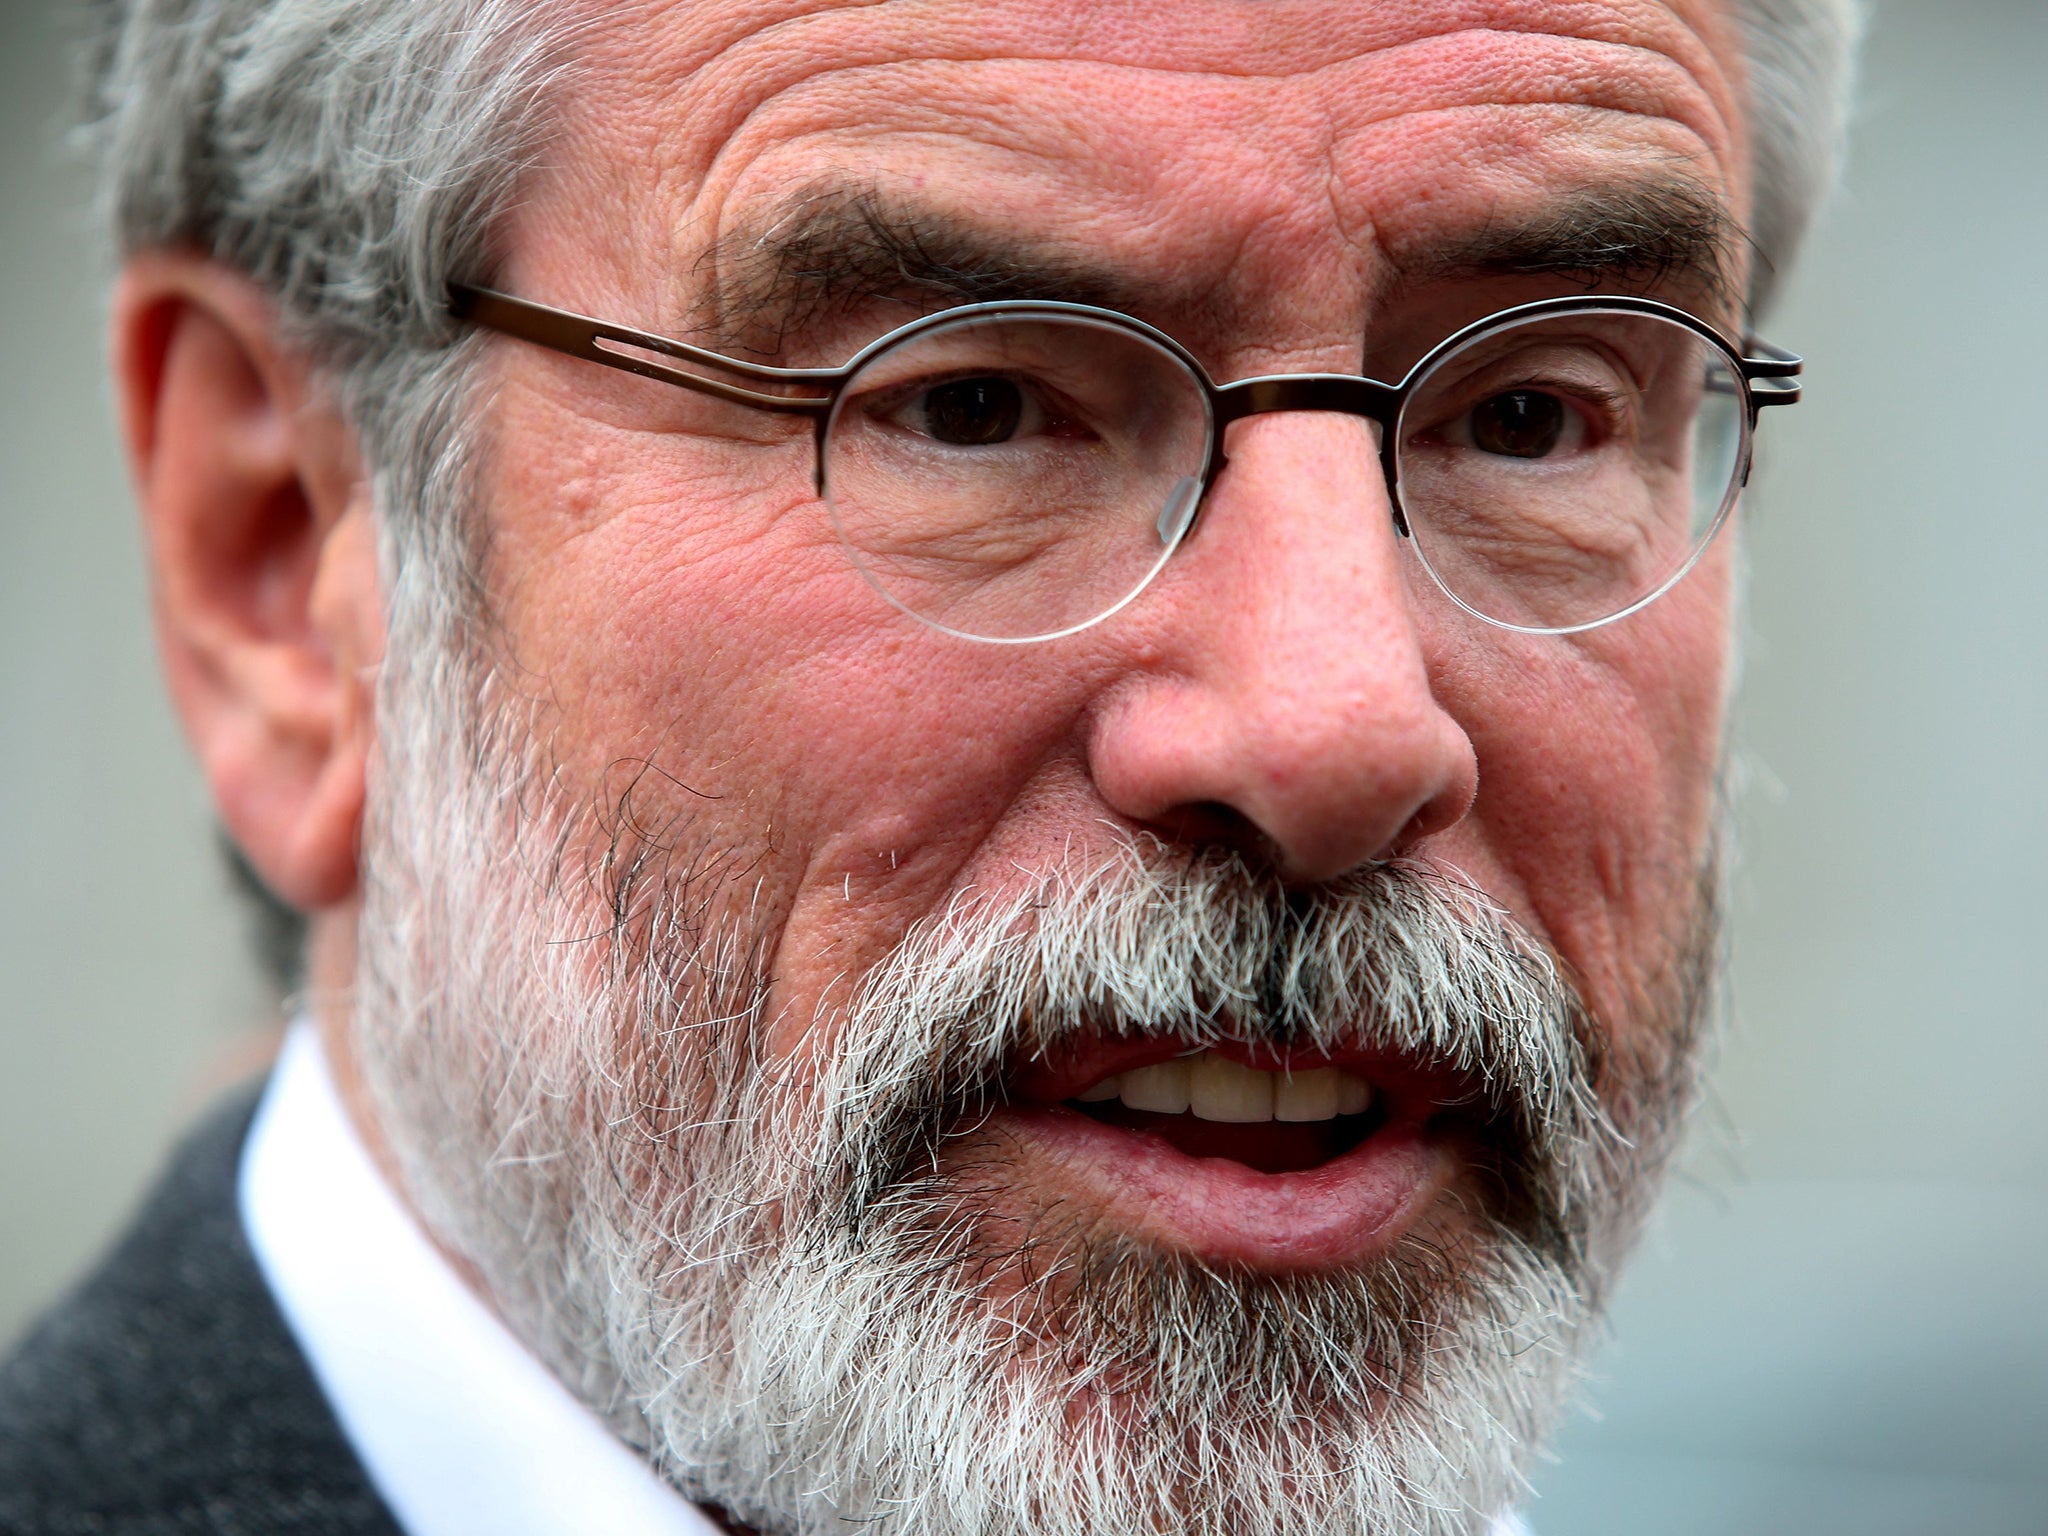 Sinn Fein leader Gerry Adams and his party were left disappointed by the result of the referendum